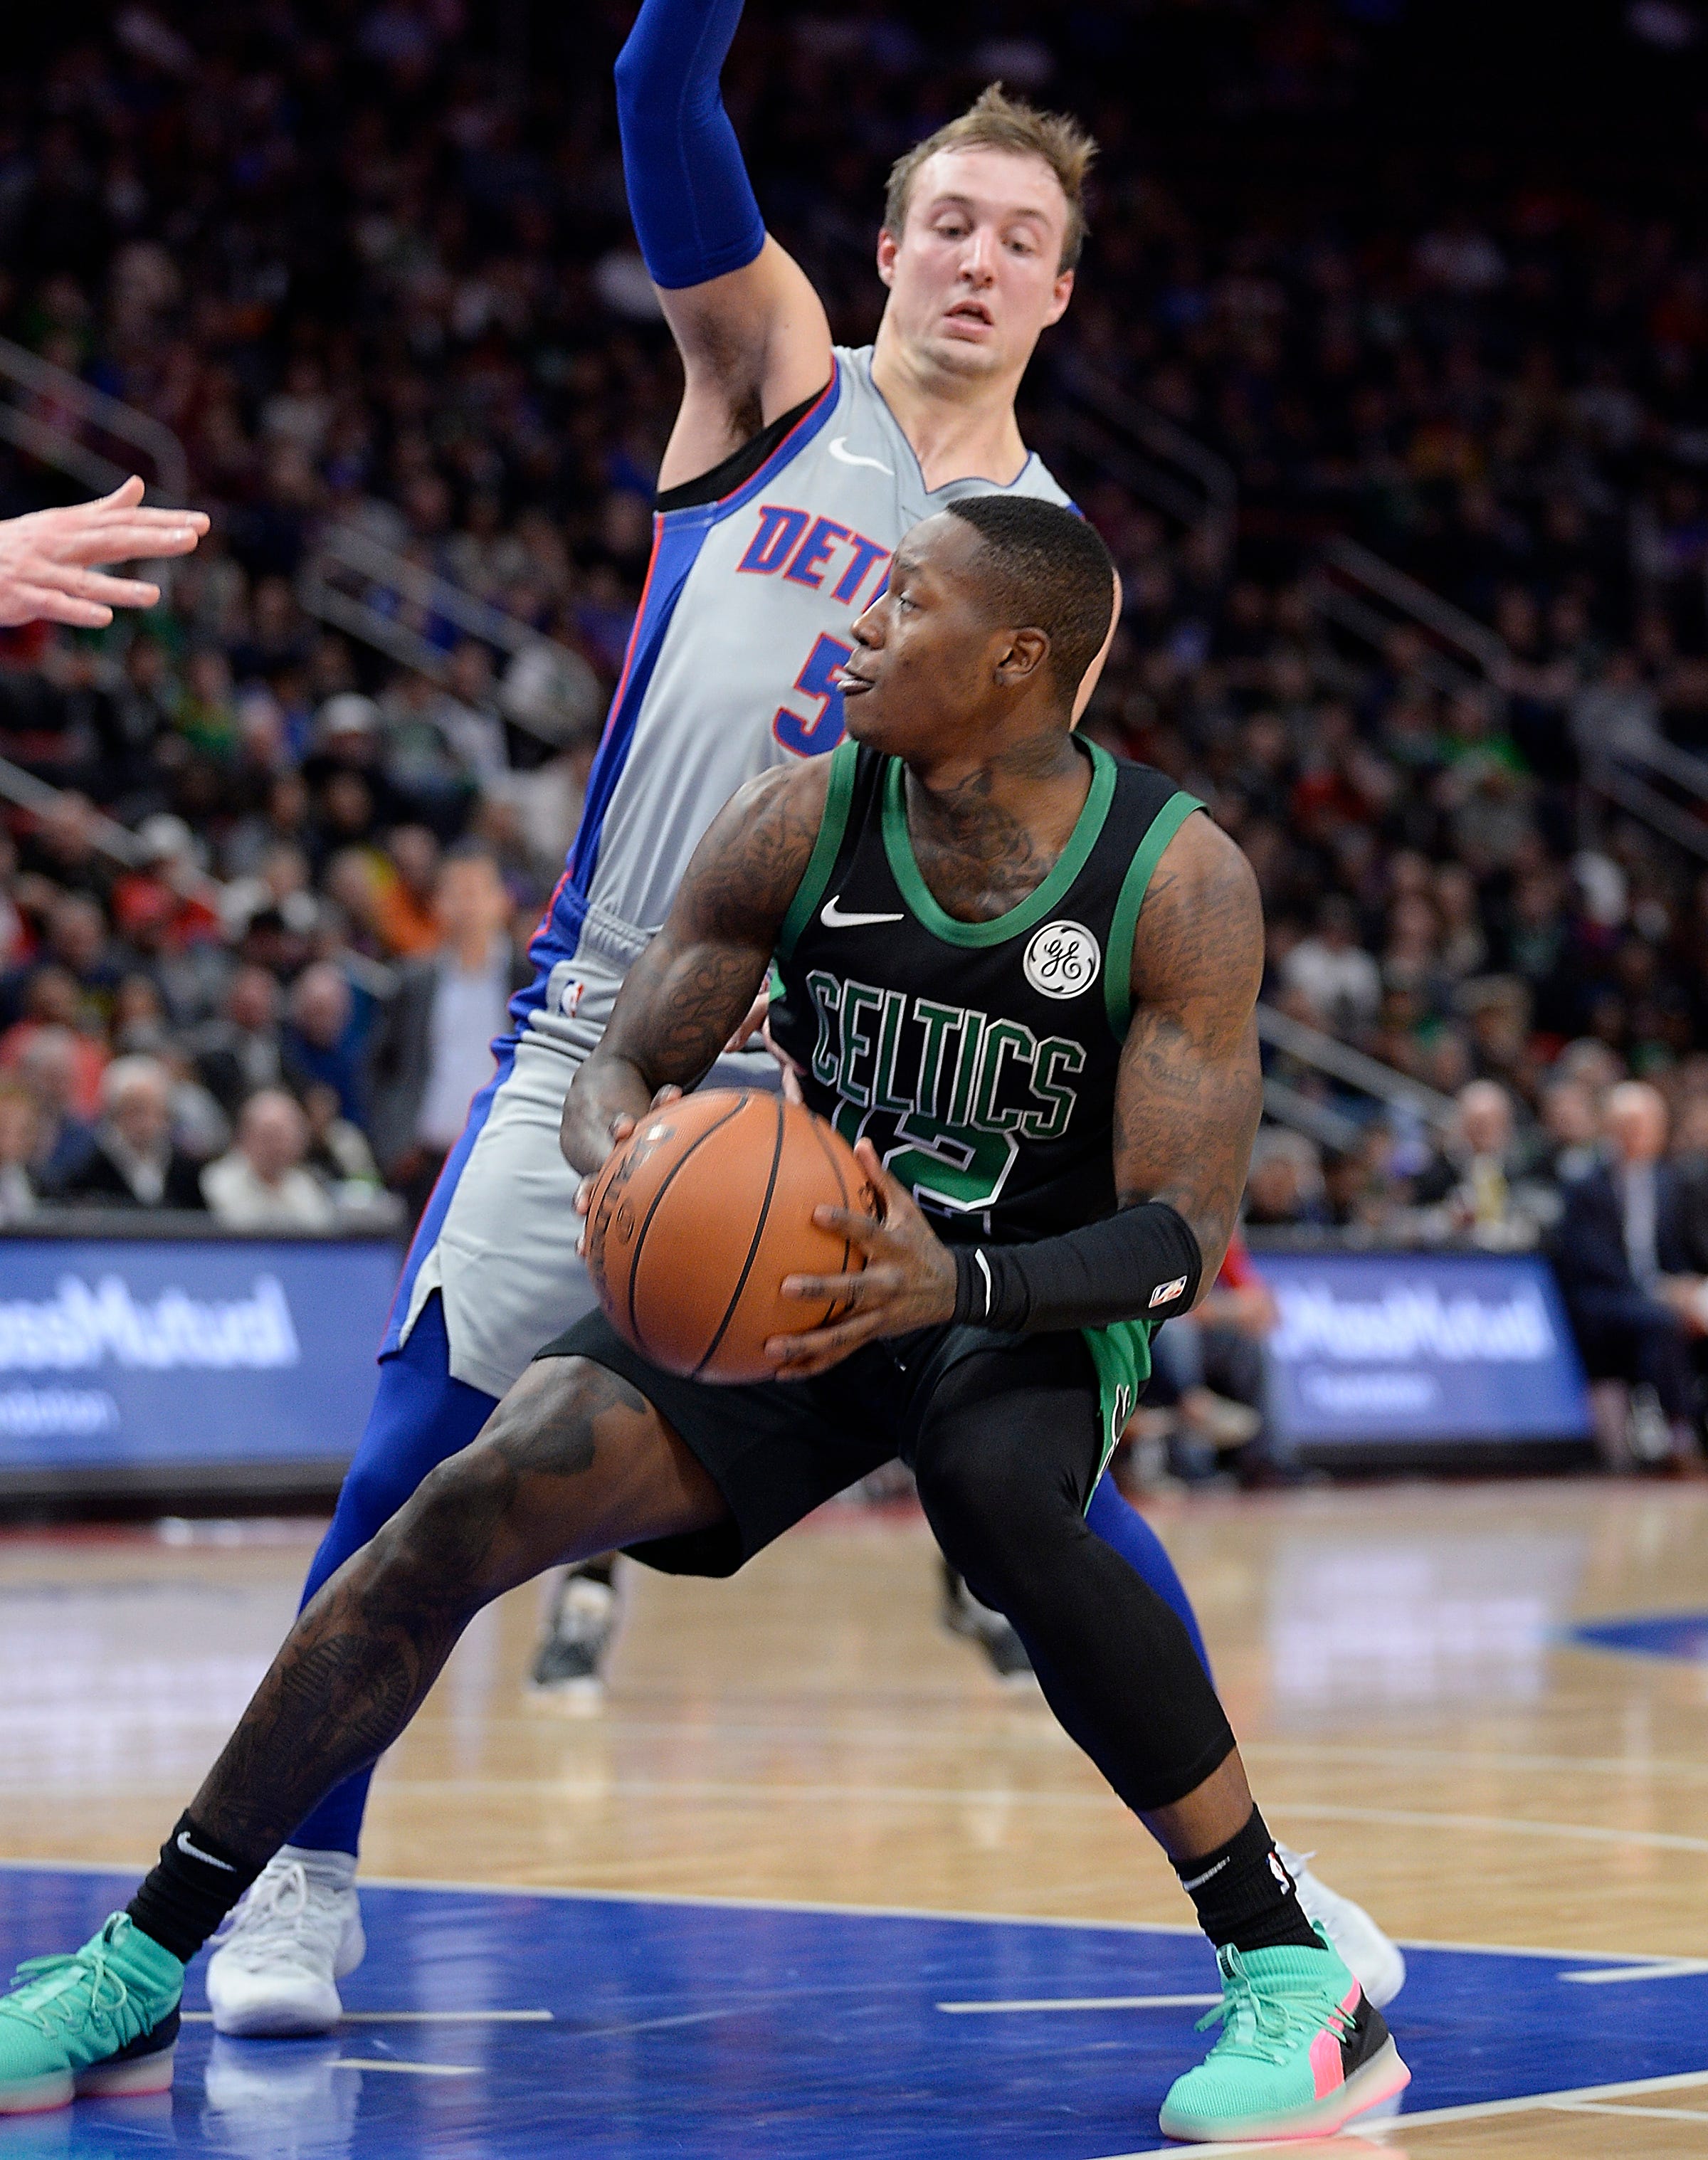 Celtics' Terry Rozier looks for room around Pistons' Luke Kennard in the second quarter.